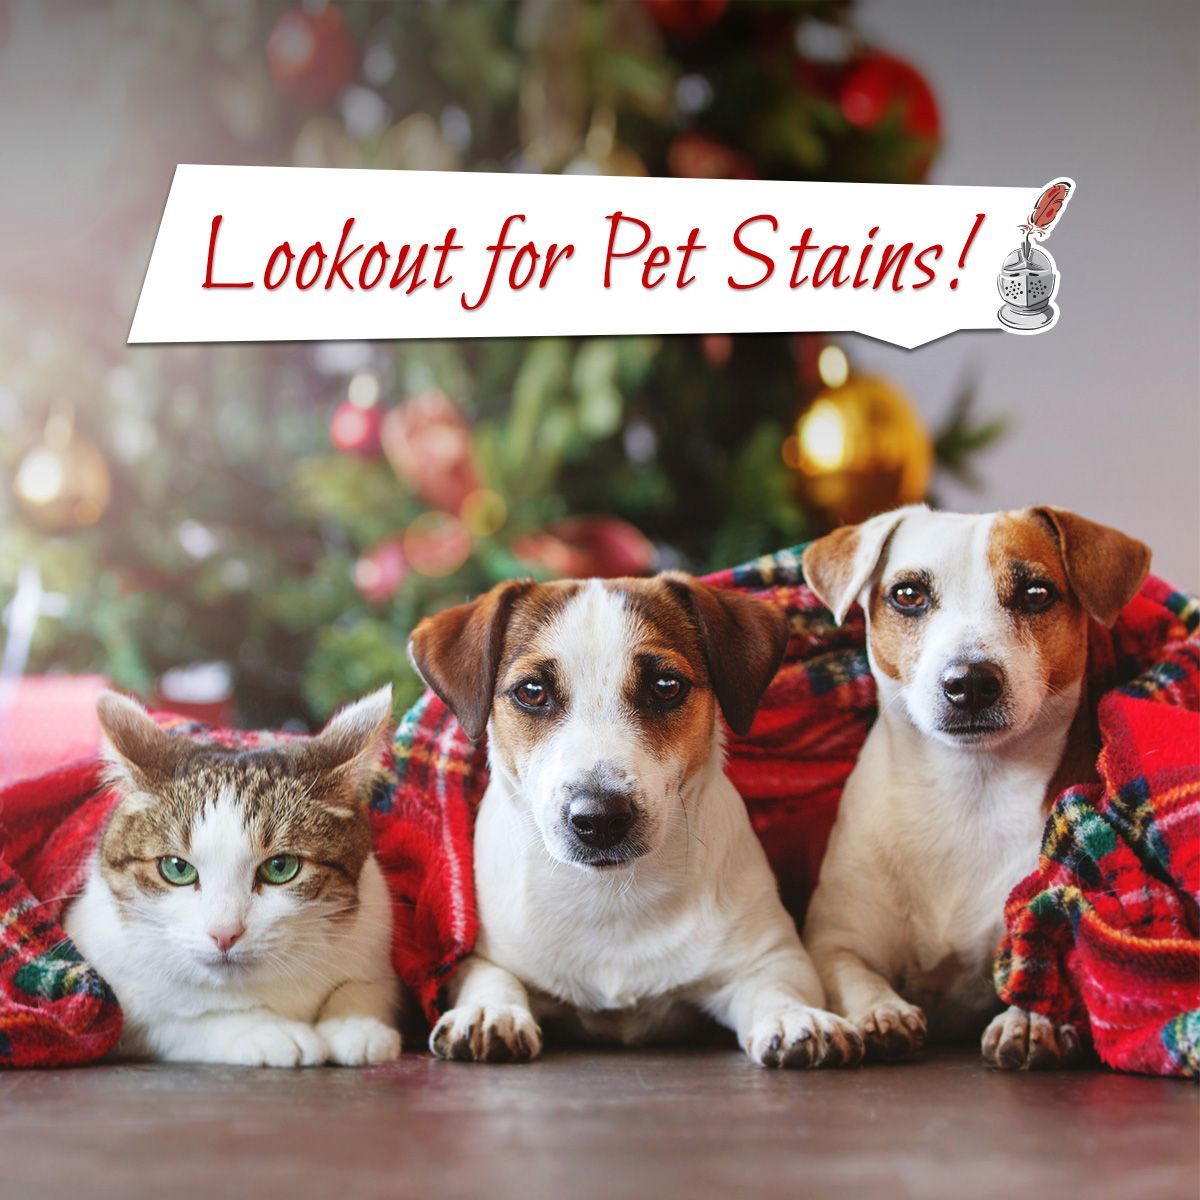 Lookout for Pet Stains!